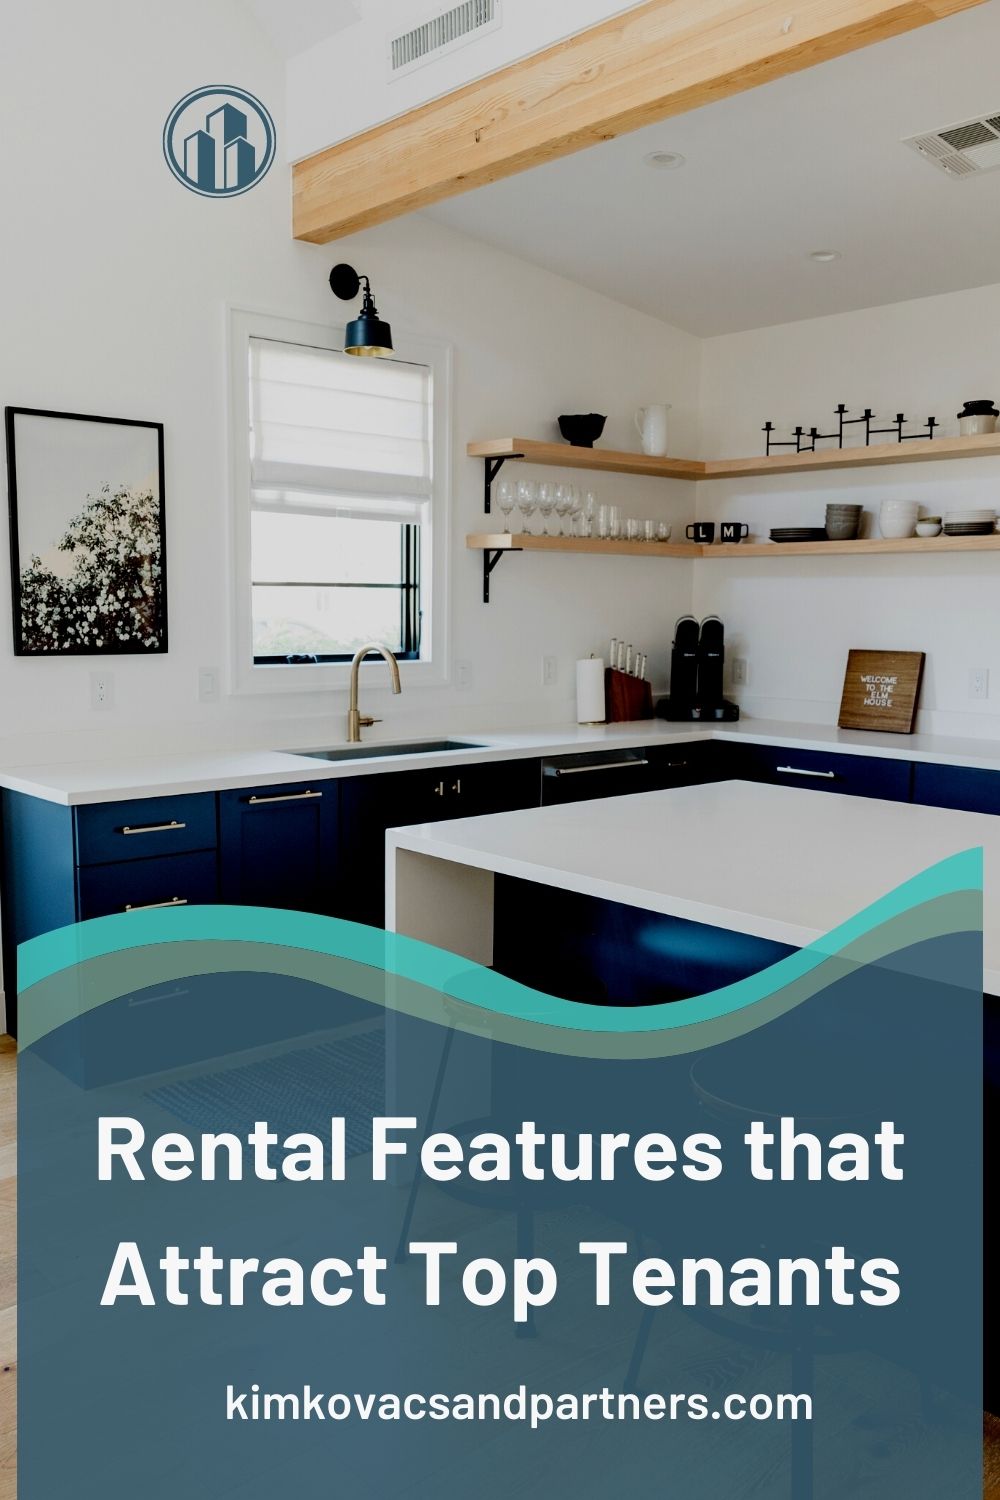 Rental Features that Attract Top Tenants